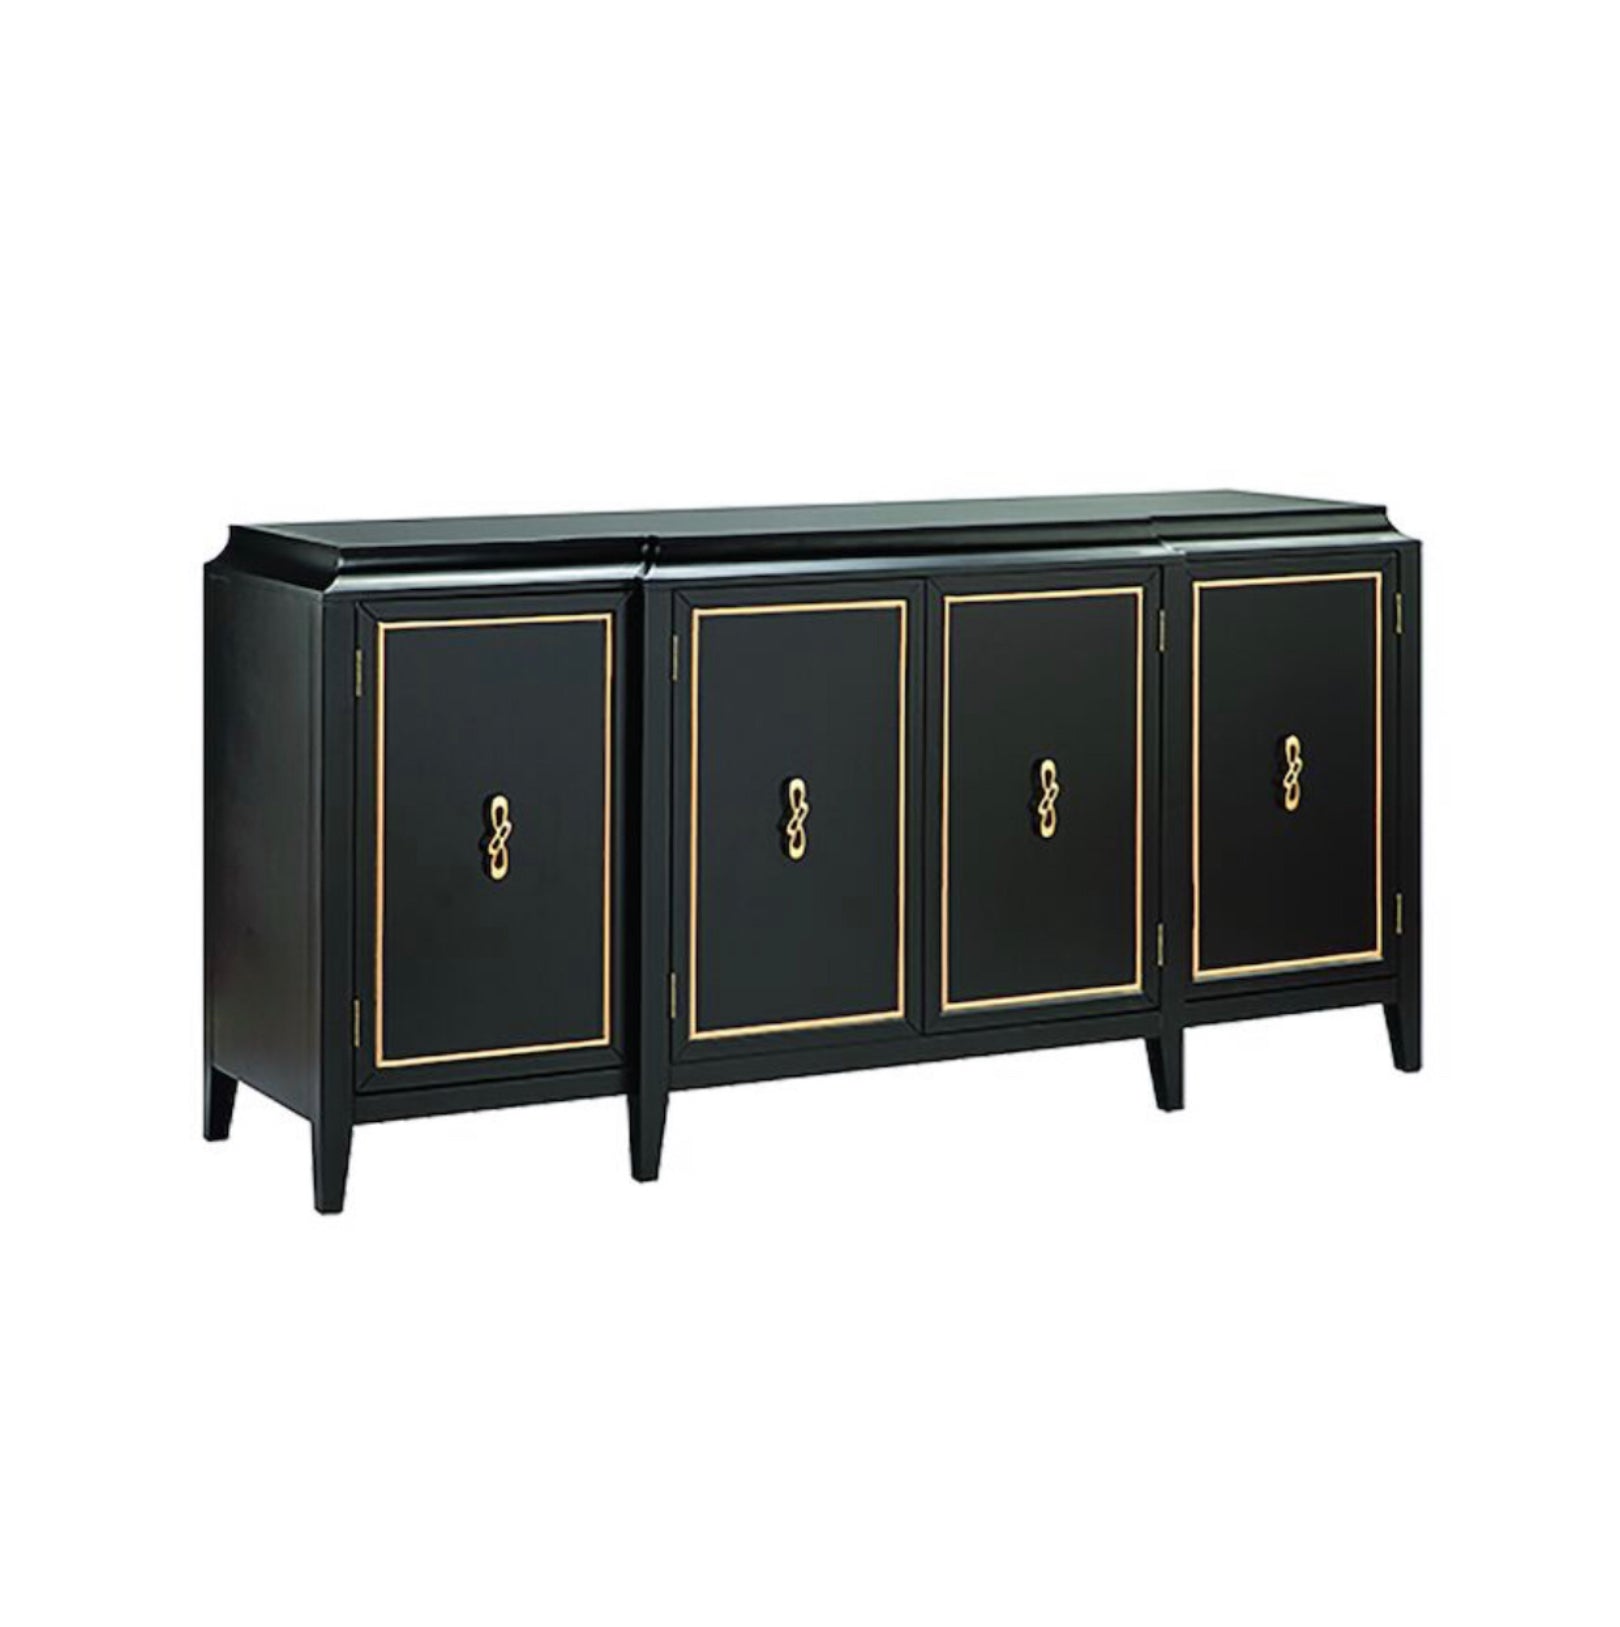 The Hawick Credenza is a striking four-door storage cabinet made from ash solids and veneer with a weathered white painted finish.   Each door features a central metal rectanglular door handle with a center panel made from the same cerused wood. Inner shelves within the cabinet offer ample storage.  Dimensions:72" W x 18" D x 36" H